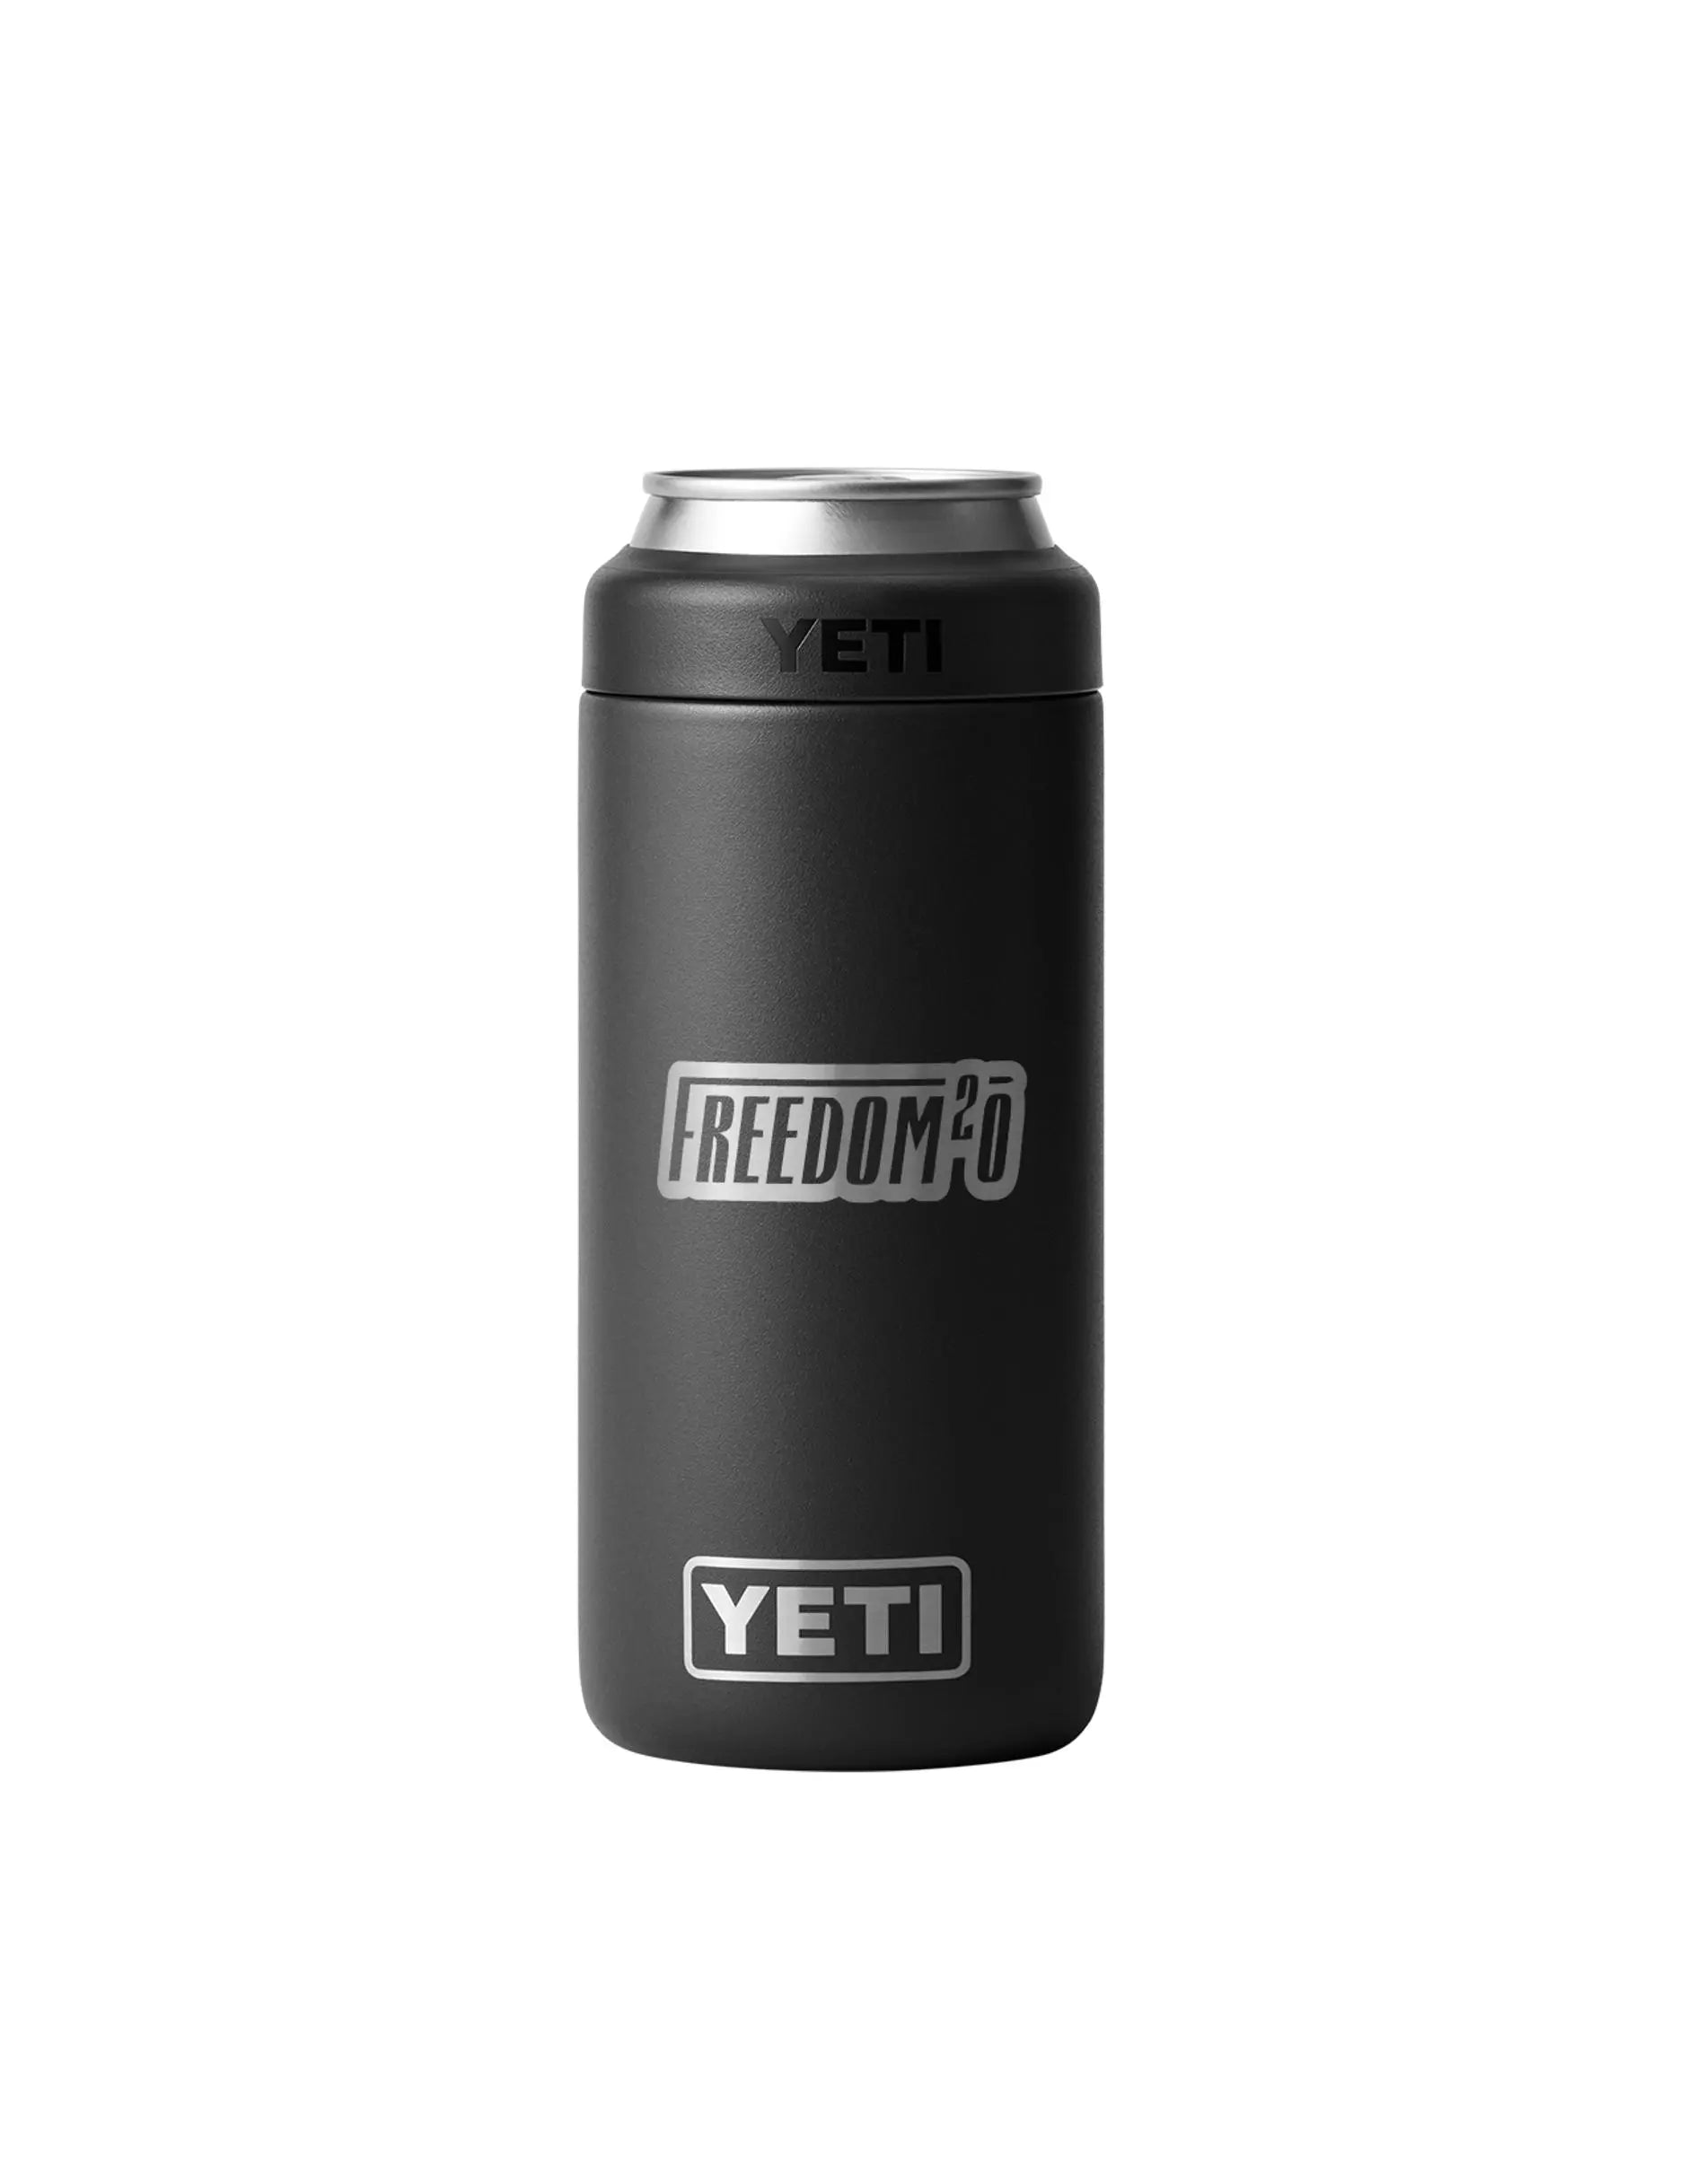 YETI "THIS DRINK AINT WOKE" Can Cooler Freedom2o